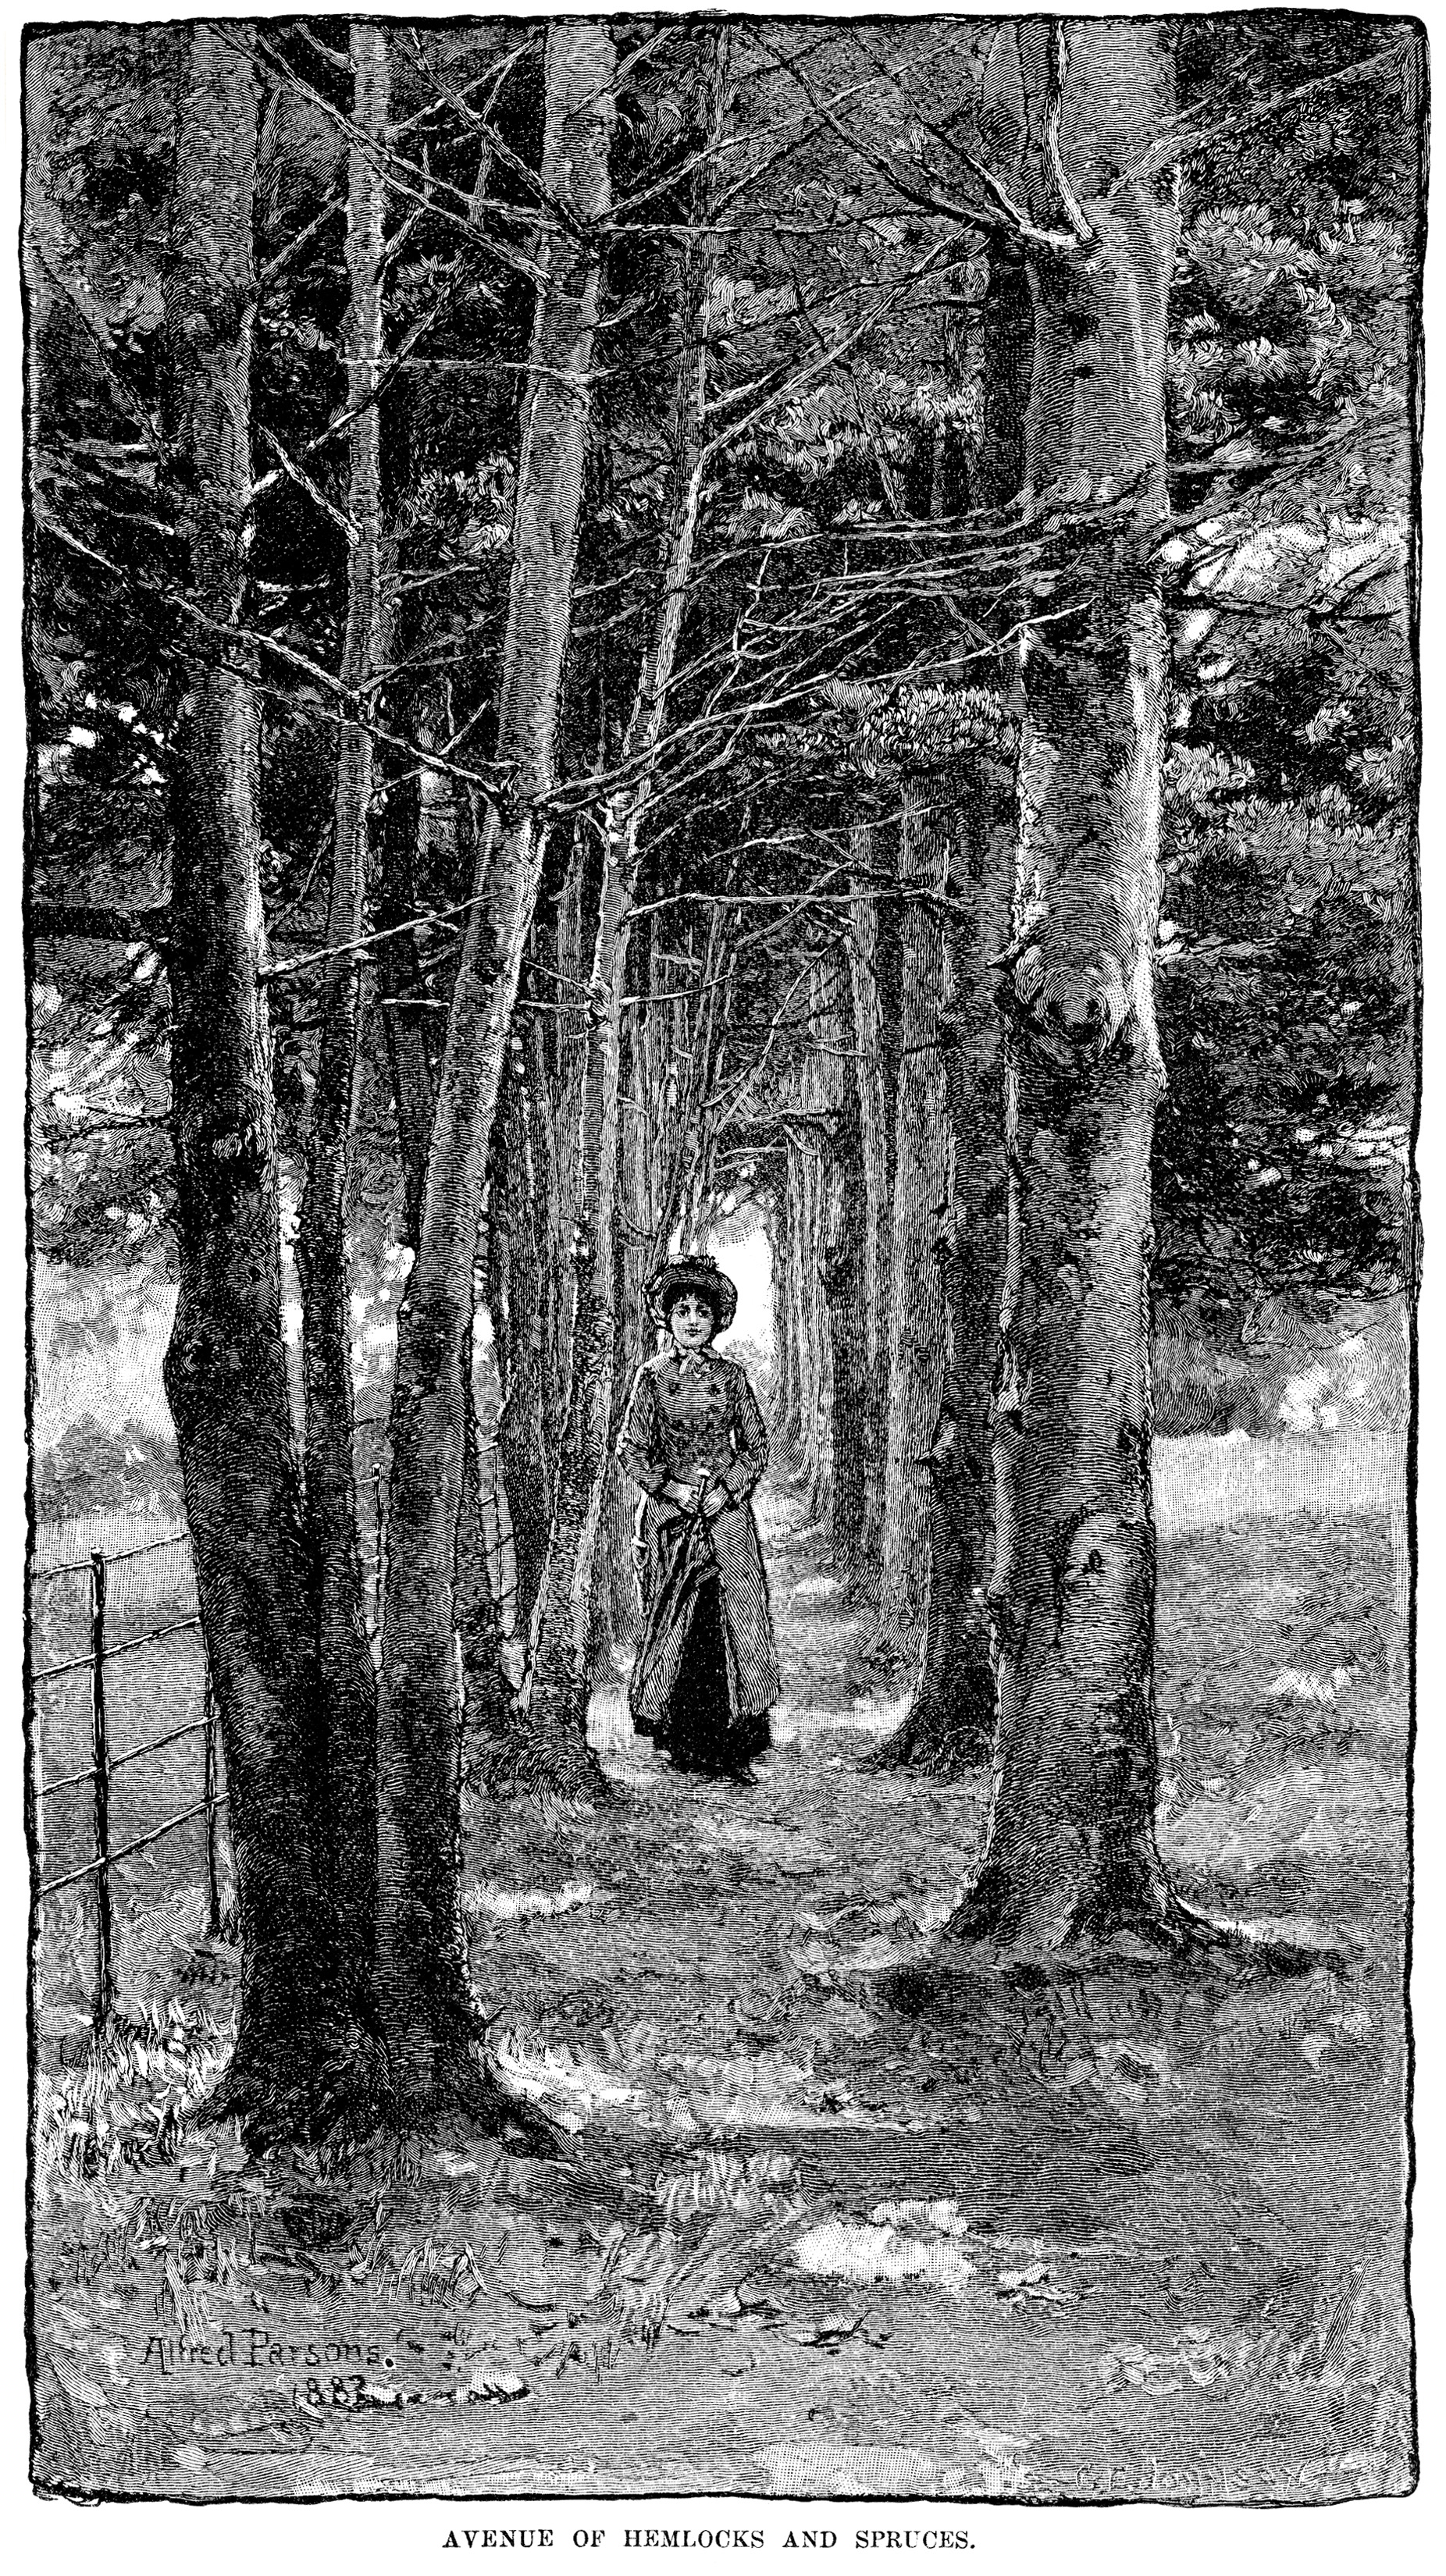 Alfred Parsons, avenue of hemlocks and spruces, vintage engraving trees, black and white graphics, Victorian lady outdoors clip art